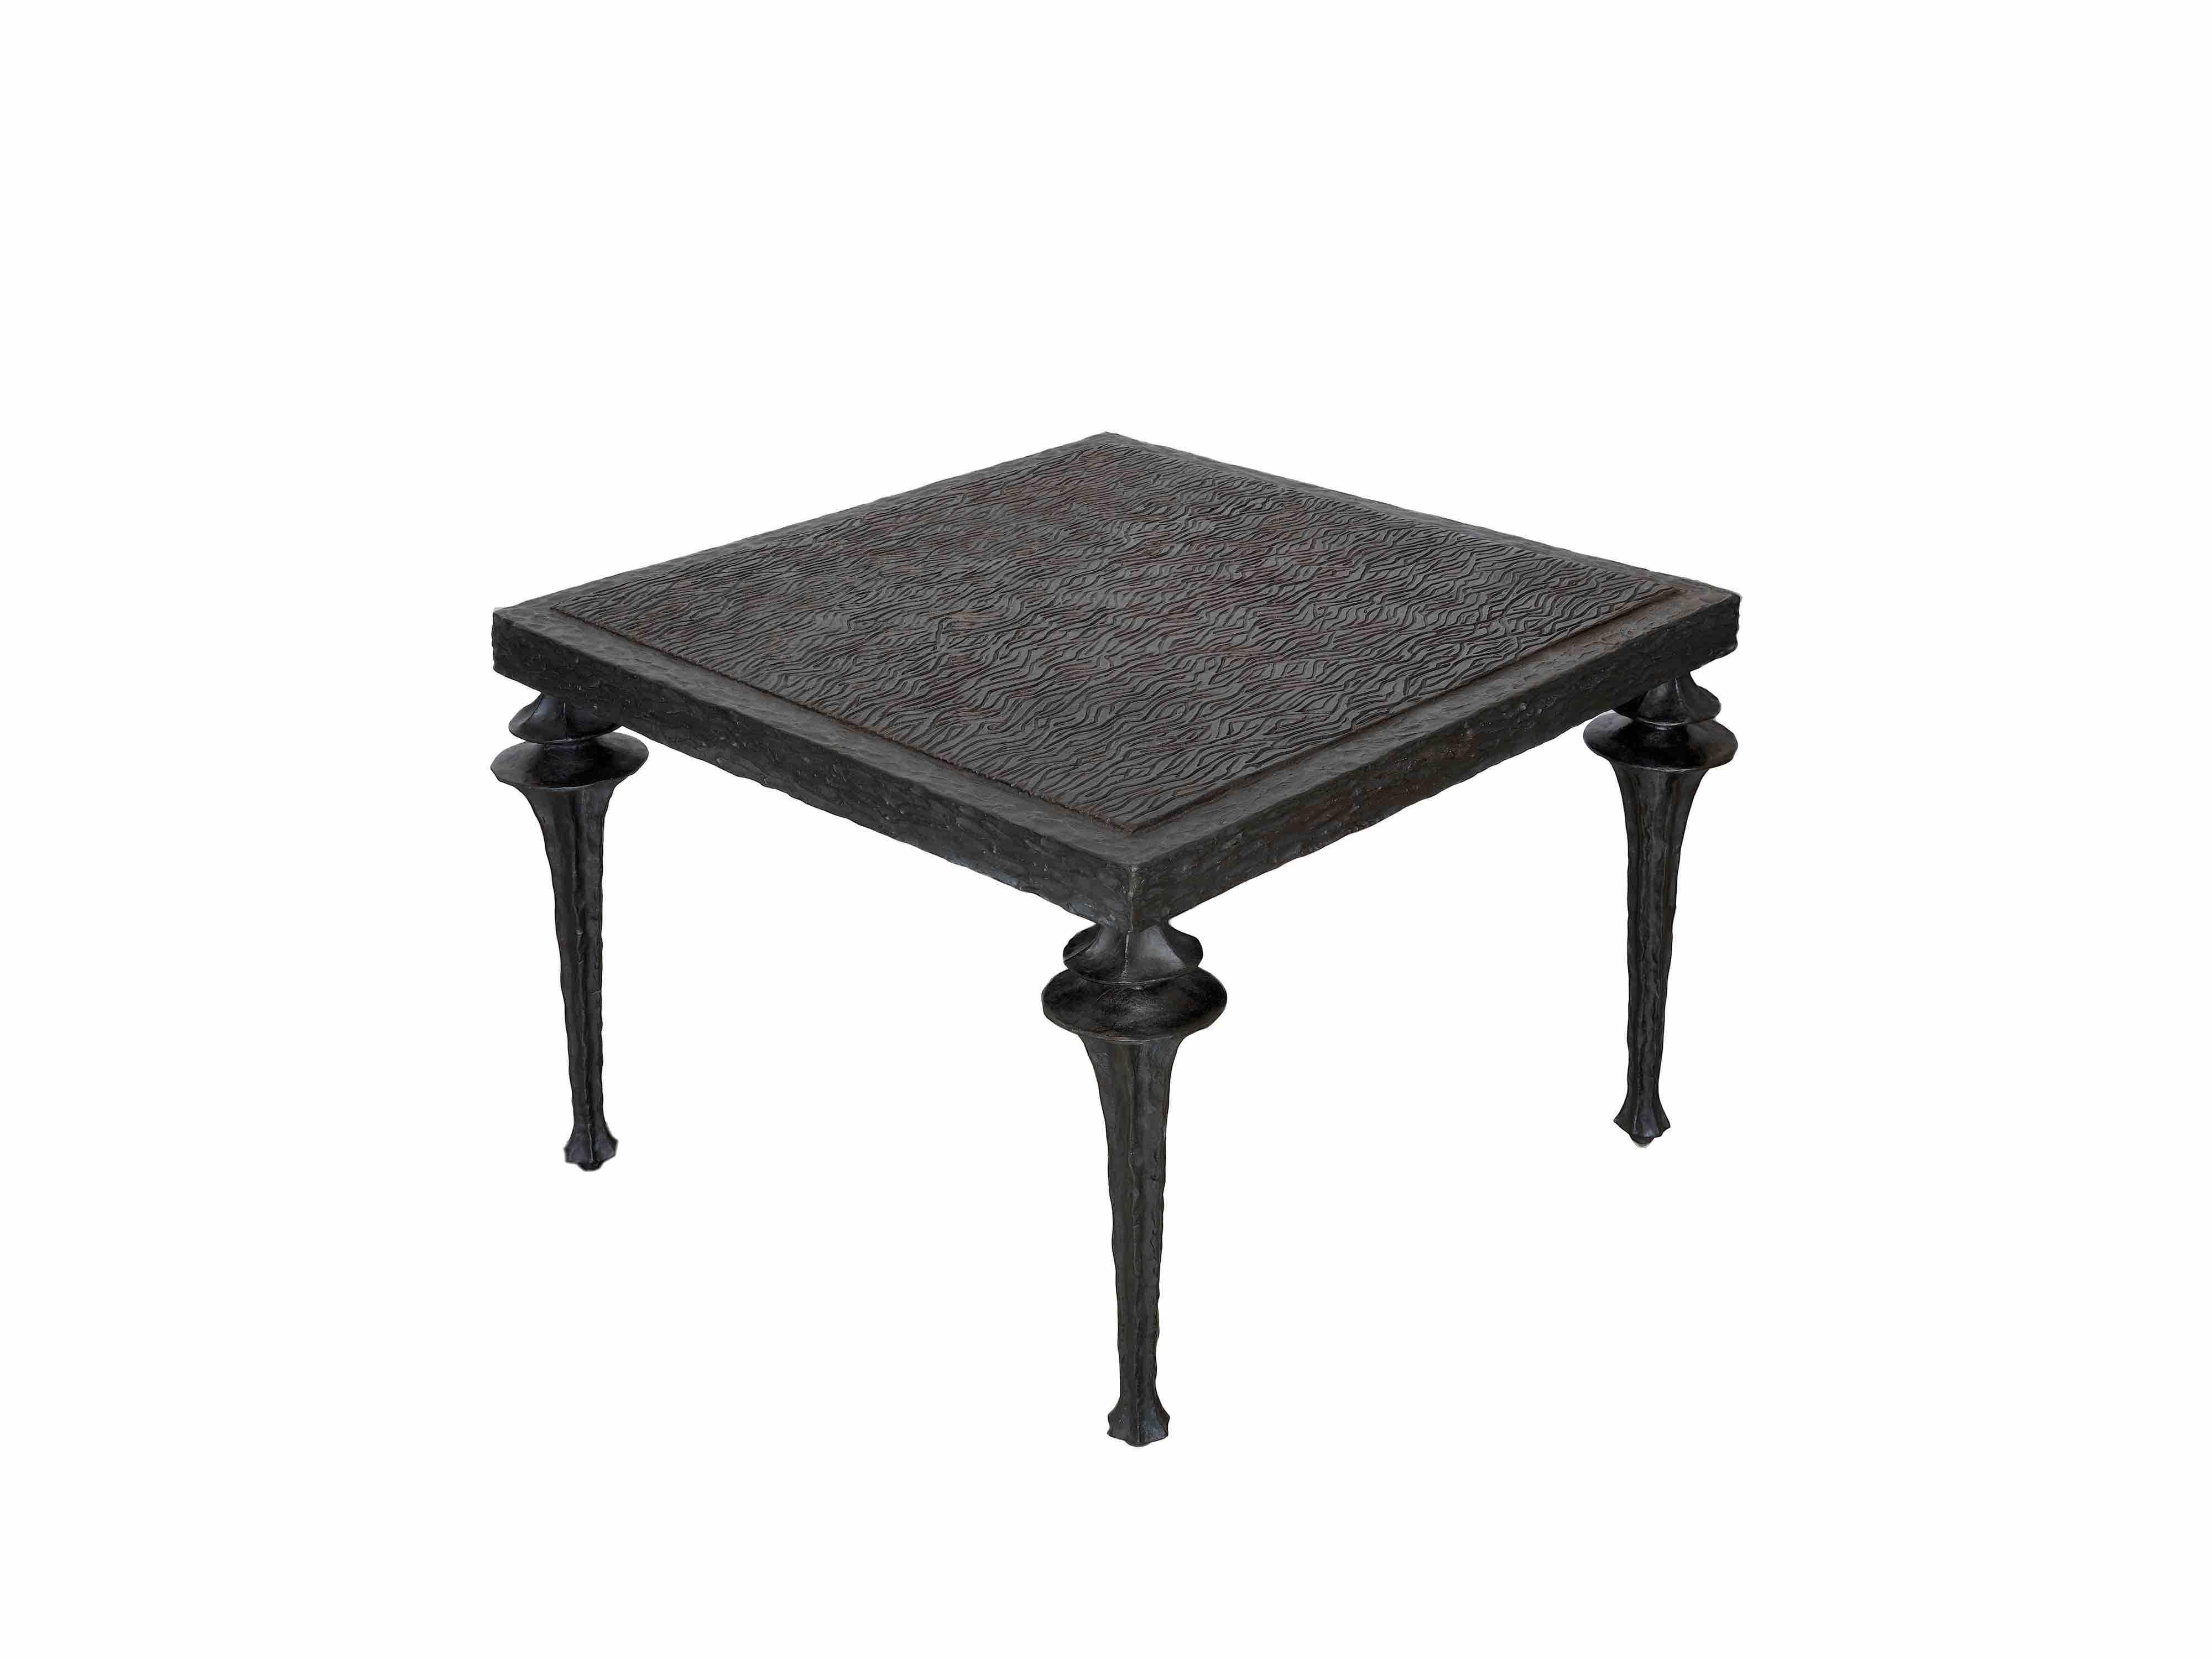 Marc Bankowsky
Side table
Patinated bronze
France, contemporary creation

This piece can be made with bespoke dimension.